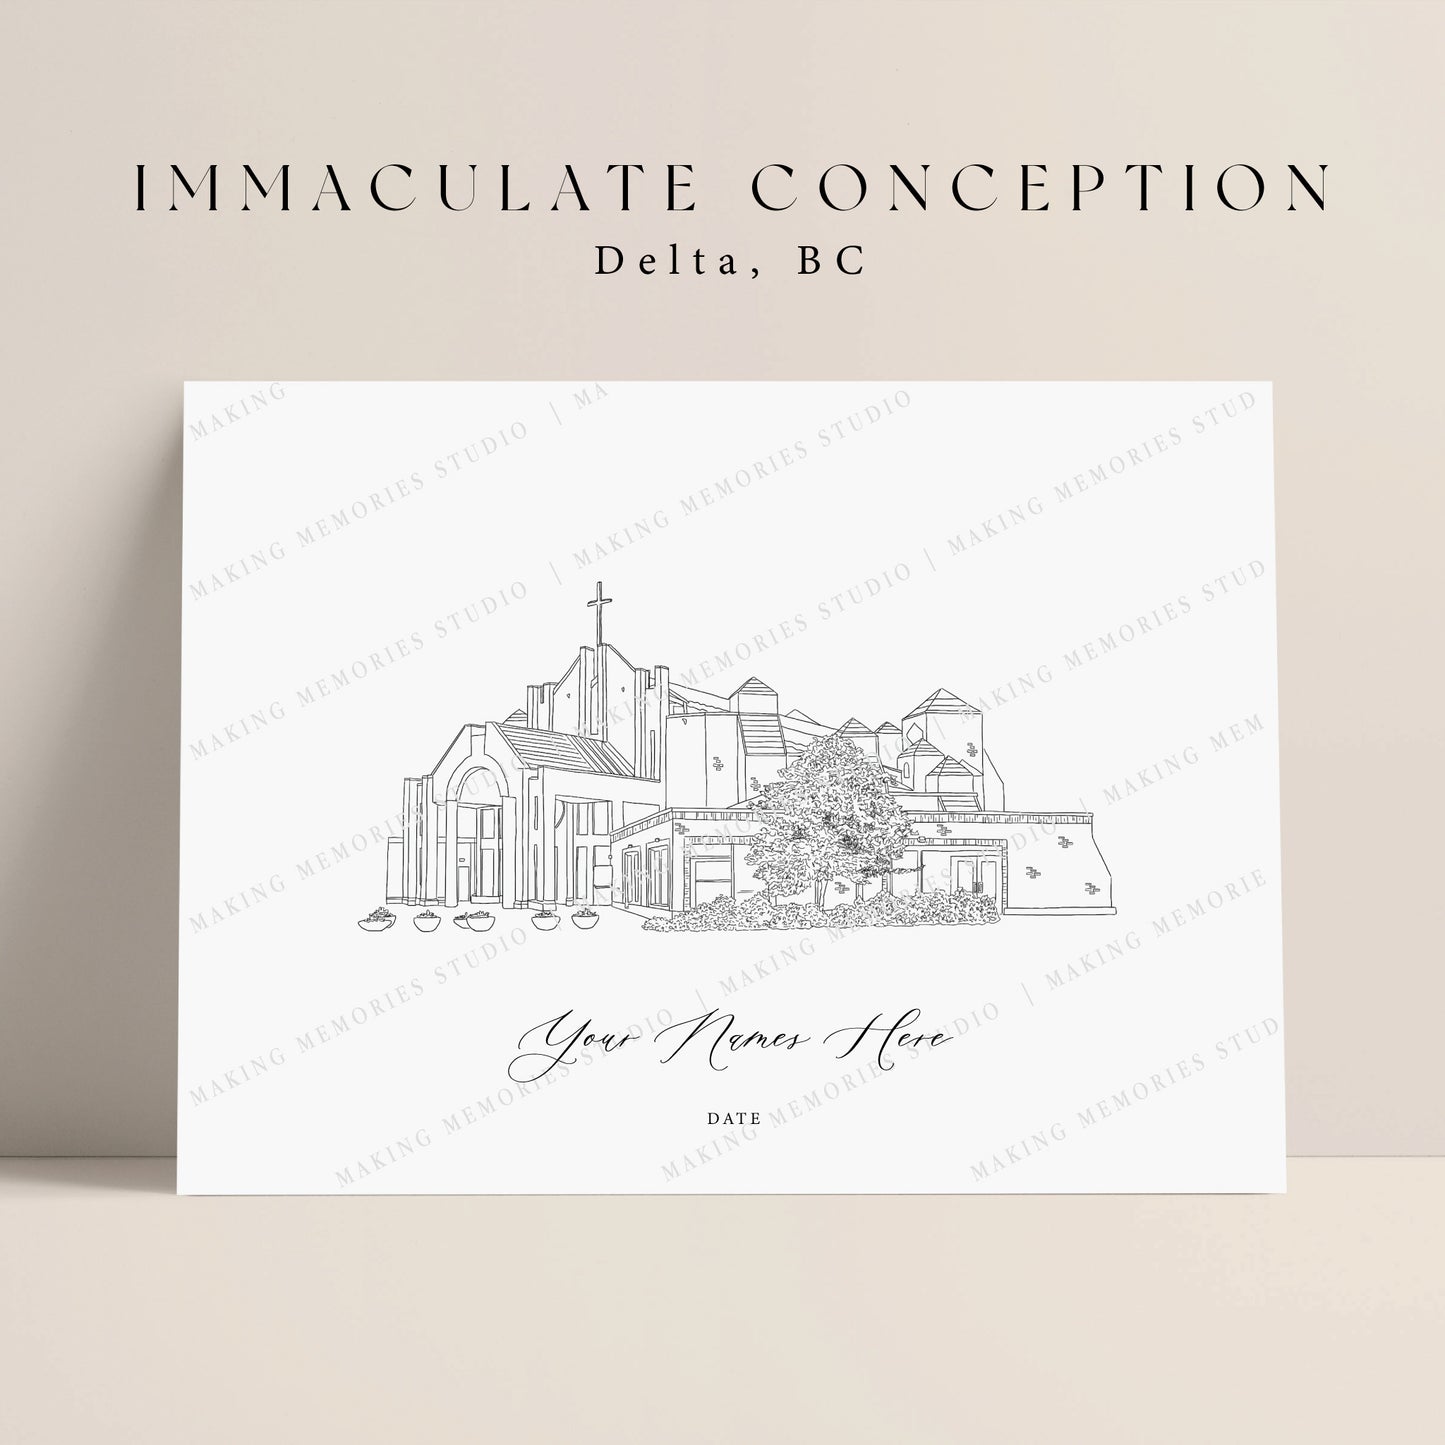 Immaculate Conception - Delta